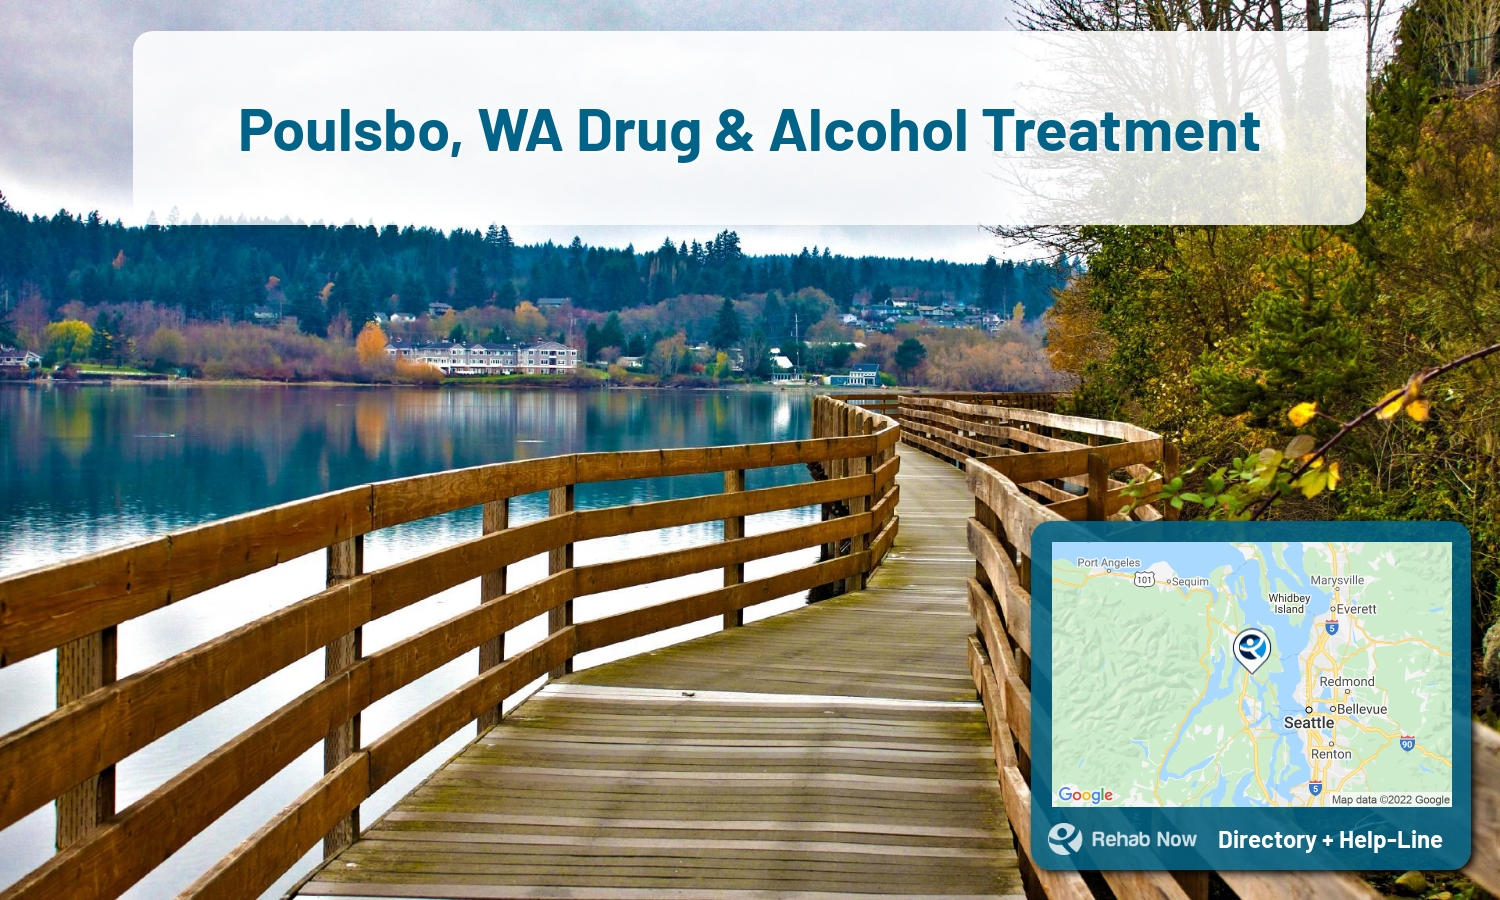 View options, availability, treatment methods, and more, for drug rehab and alcohol treatment in Poulsbo, Washington